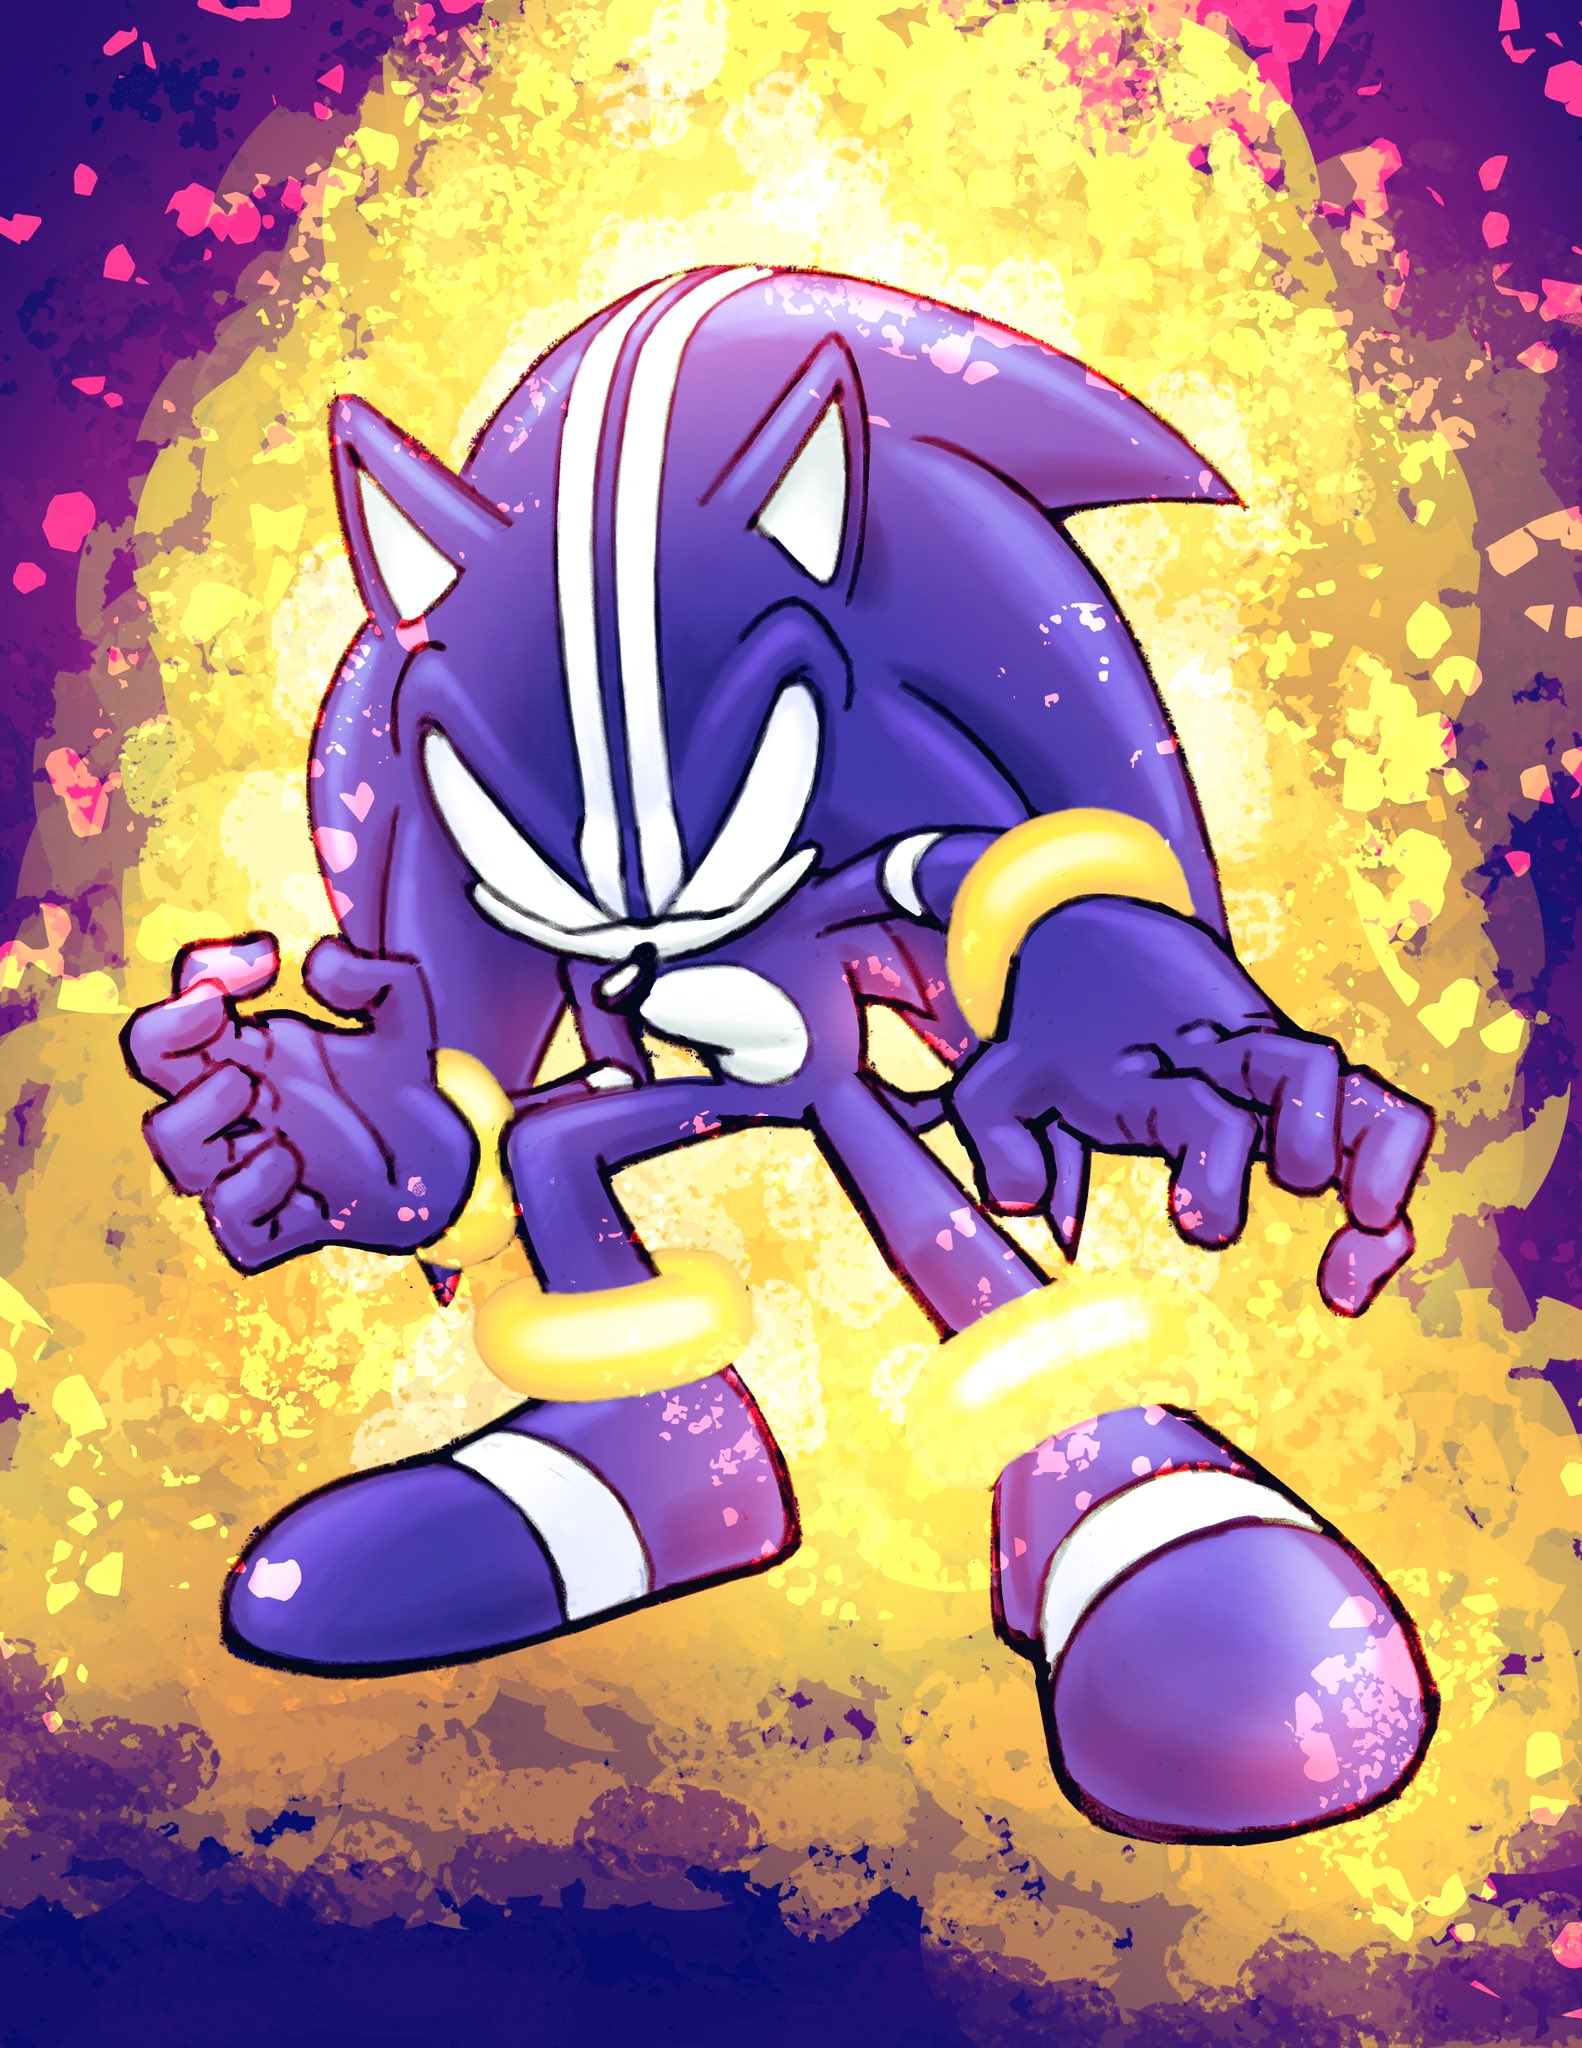 Phantom Striker 2001 🇦🇺 Level 22 on X: Darkspine Sonic is in my opinion,  one of the coolest transformations. Great to see artwork of him from one of  the best.  /